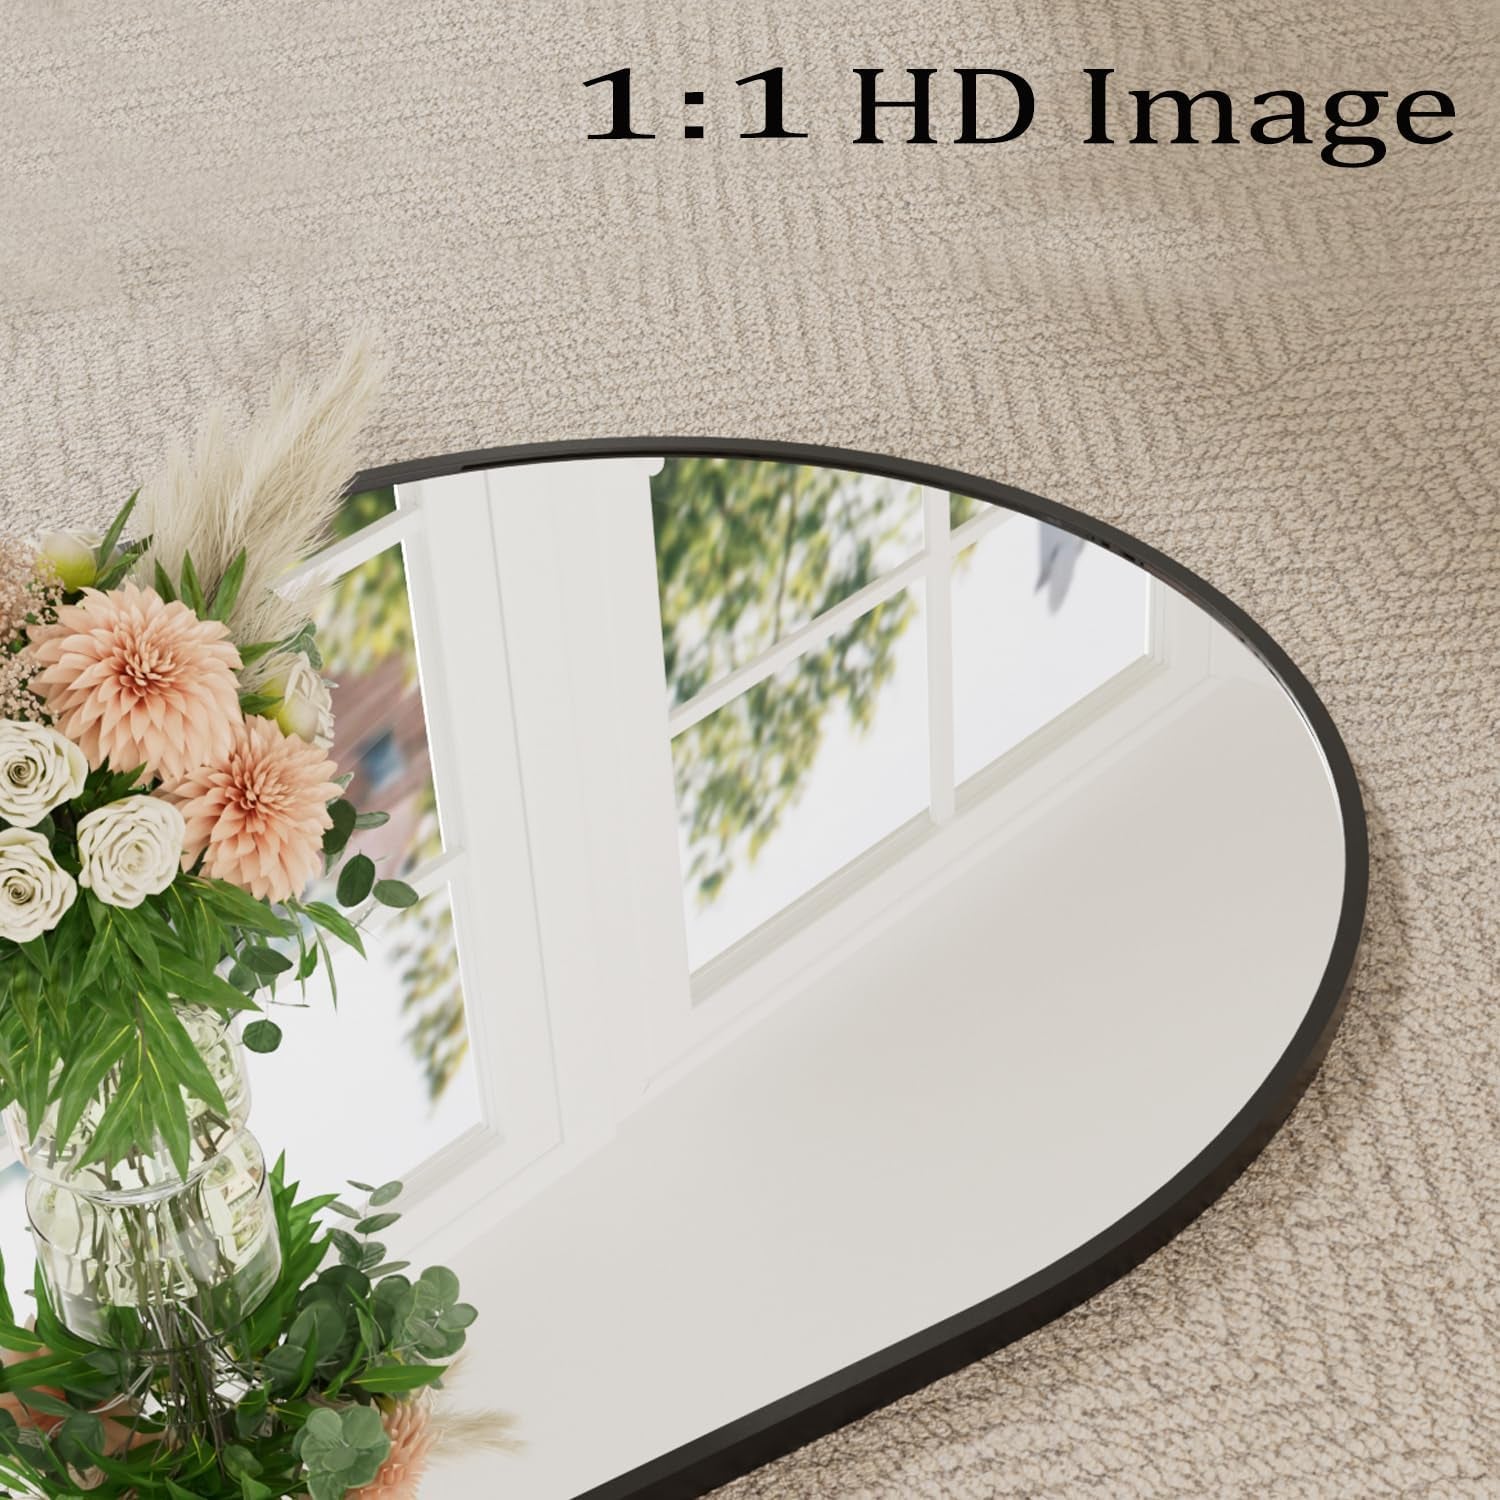 71''X30'' Arched Full Length Floor Mirror Large Mirror Full Length with Stand, Big Full Body Mirror for Bedroom, Living Room, Oversized Mirror for Wall Mounted,Hanging Mirror,Black - Design By Technique